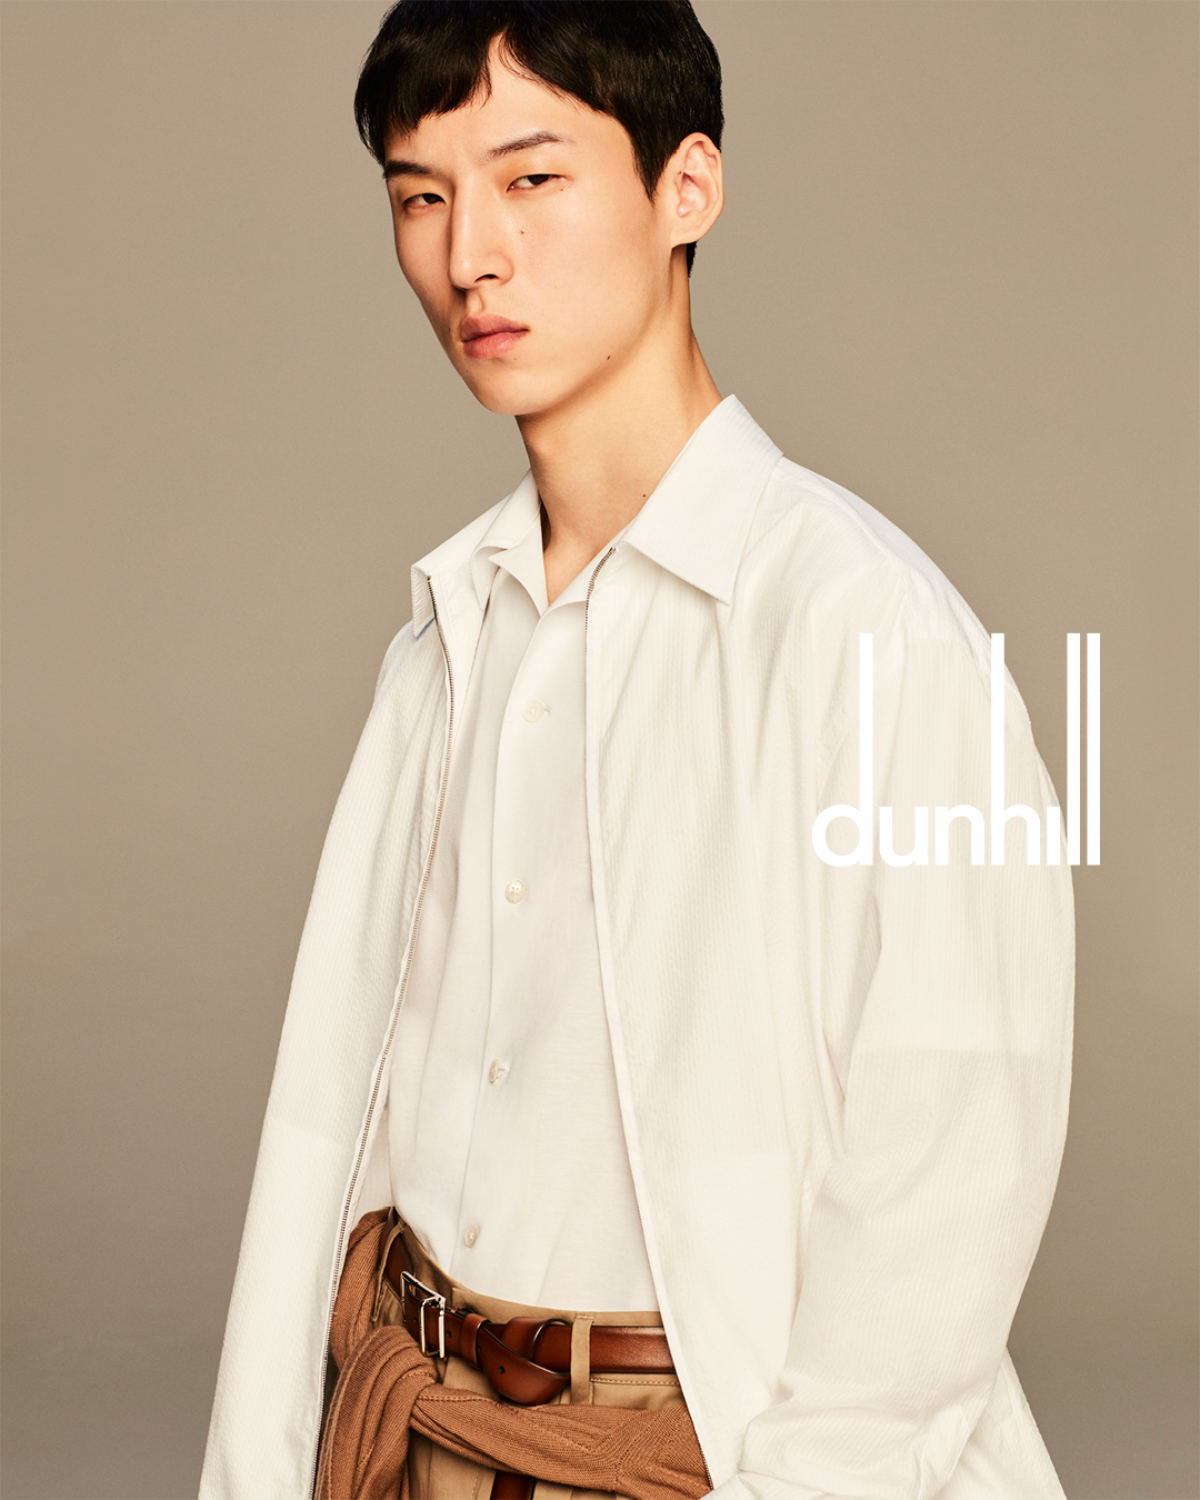 Dunhill Re-introduces Its Spring/Summer 2024 Collection: Classicism Now